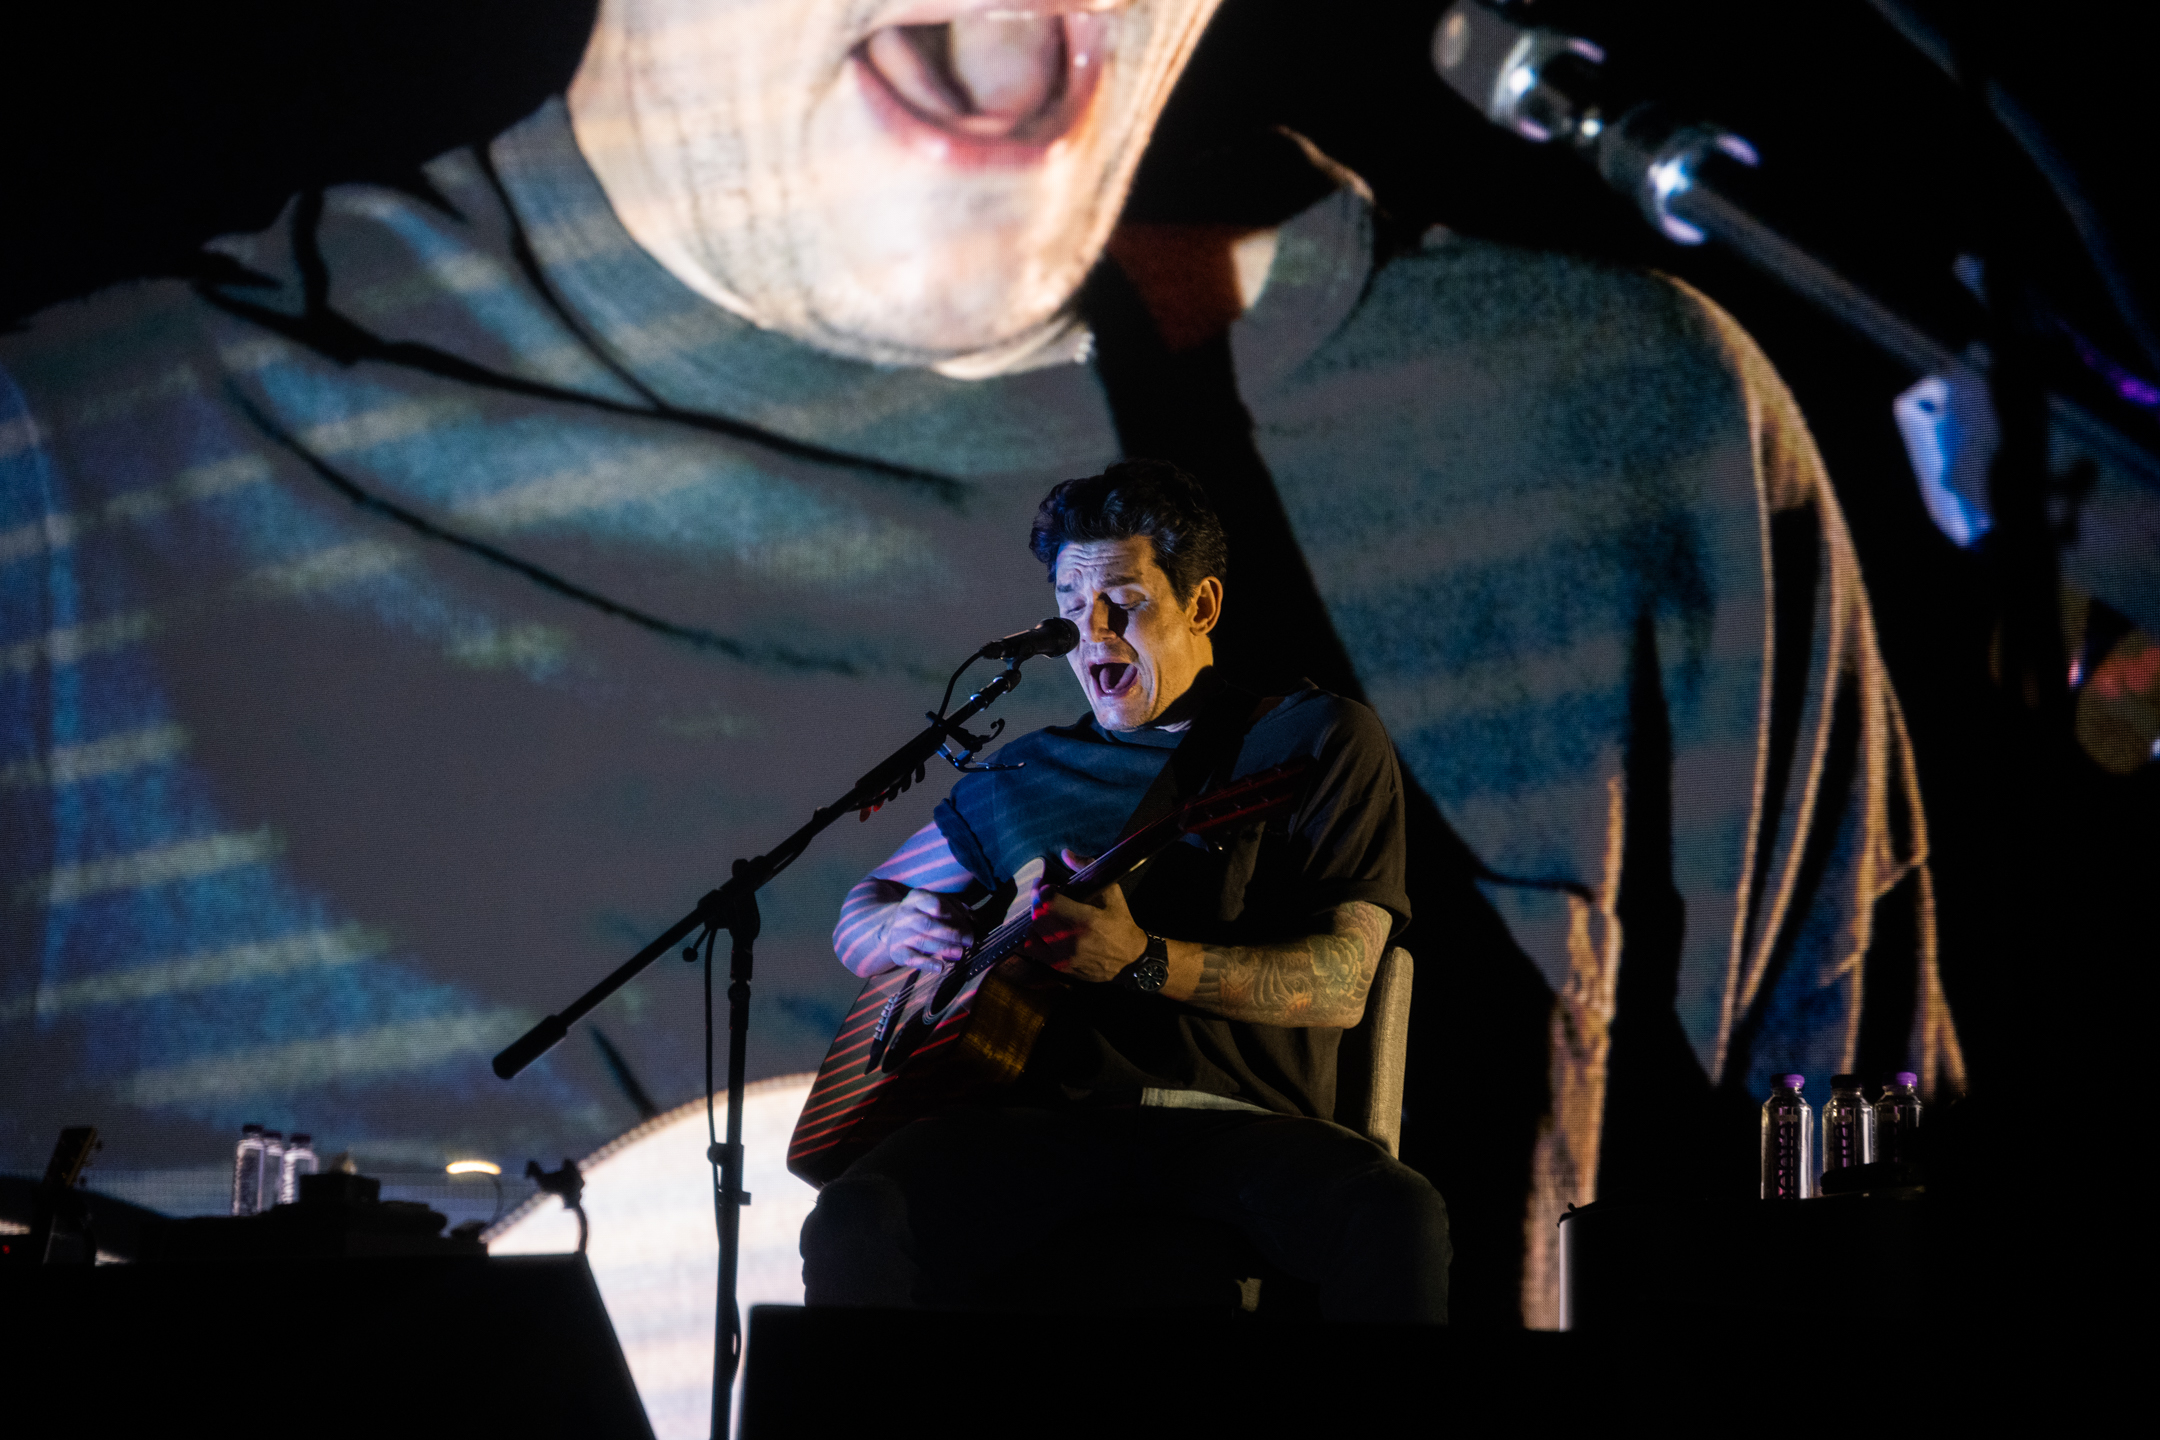 John Mayer kicks off his Solo tour at the Prudential Center in Newark, NJ on Saturday, March 11, 2023.